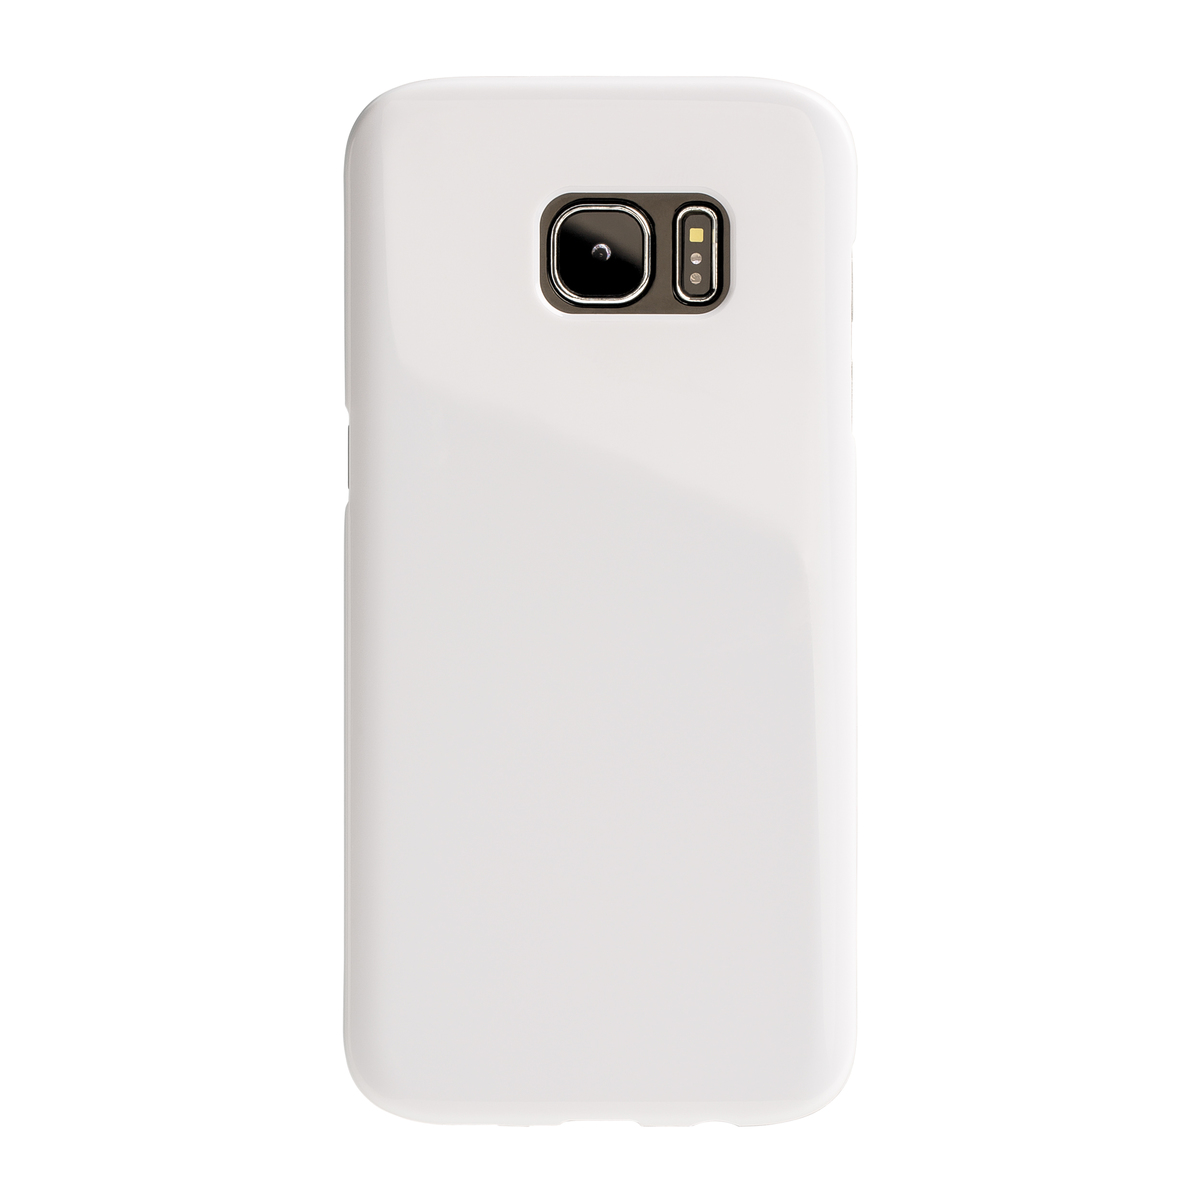 LM Smartphonecover REFLECTS-COVER XV Samsung Galaxy S7 Edge WHITE weiß